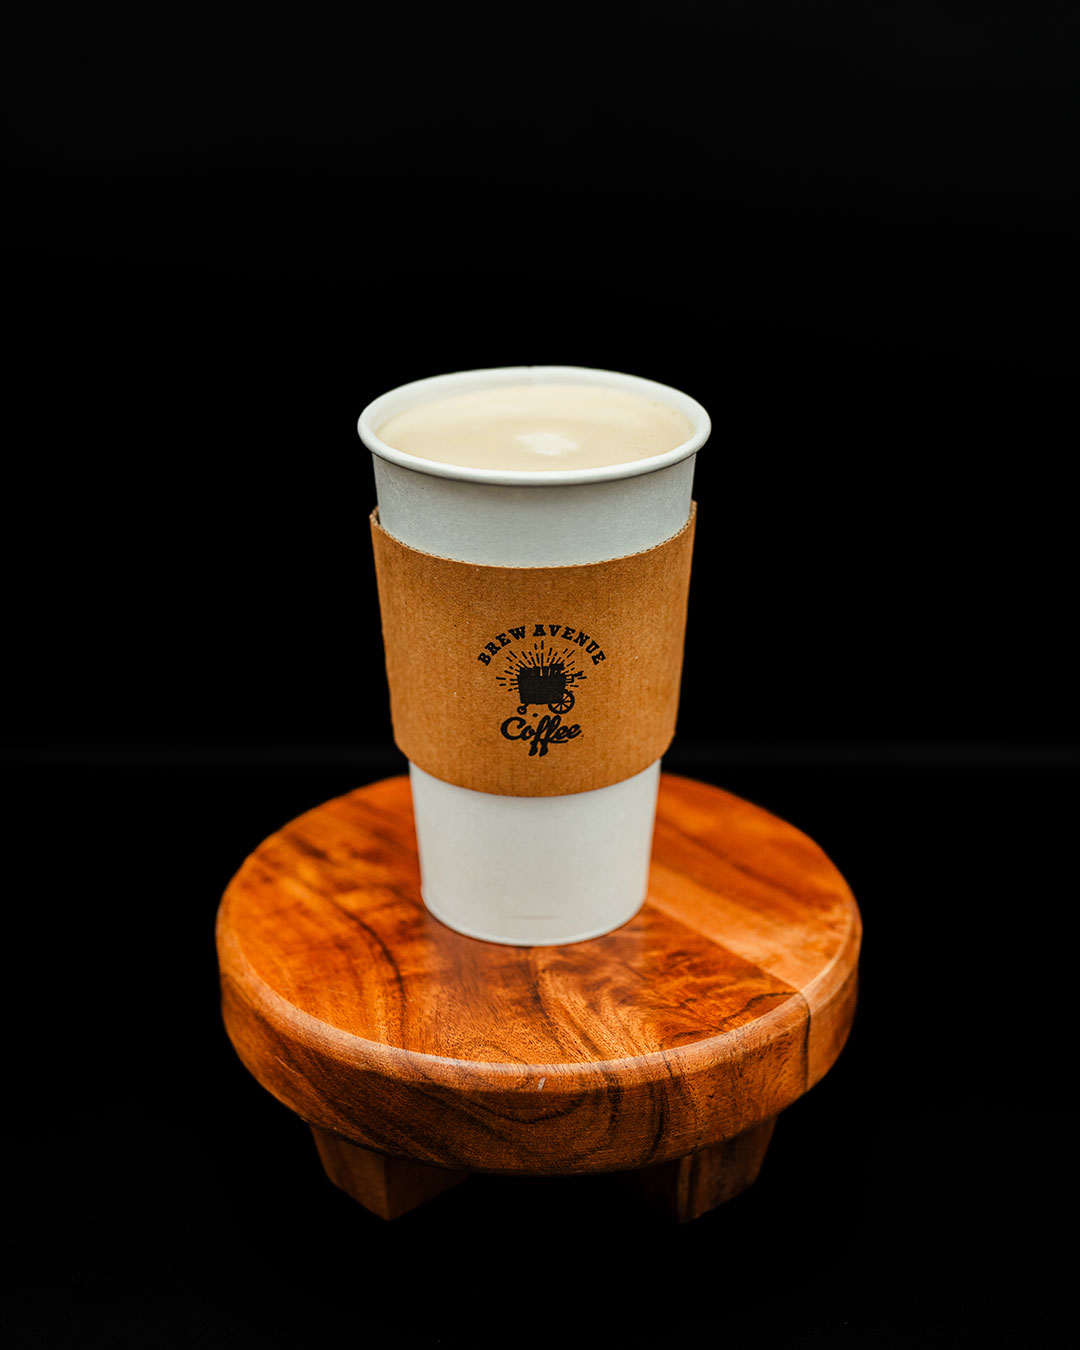 Cappuccino in a white cup with the Brew Avenue Coffee logo on a wooden stool.